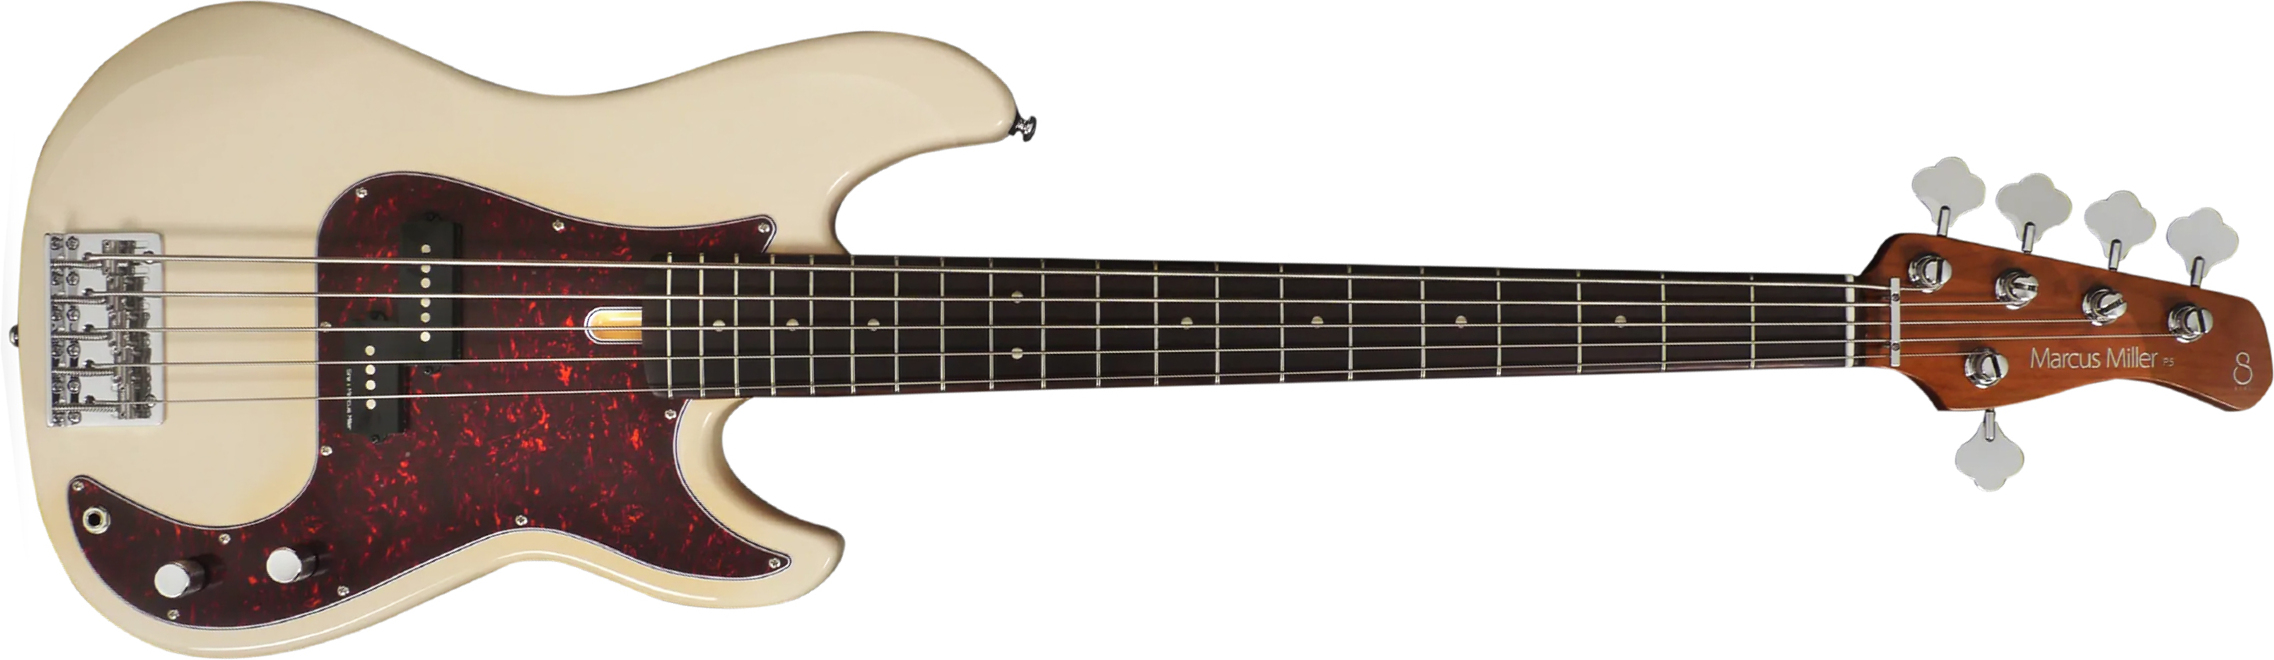 Marcus Miller P5r 5st 5c Rw - Vintage White - Solidbody E-bass - Main picture